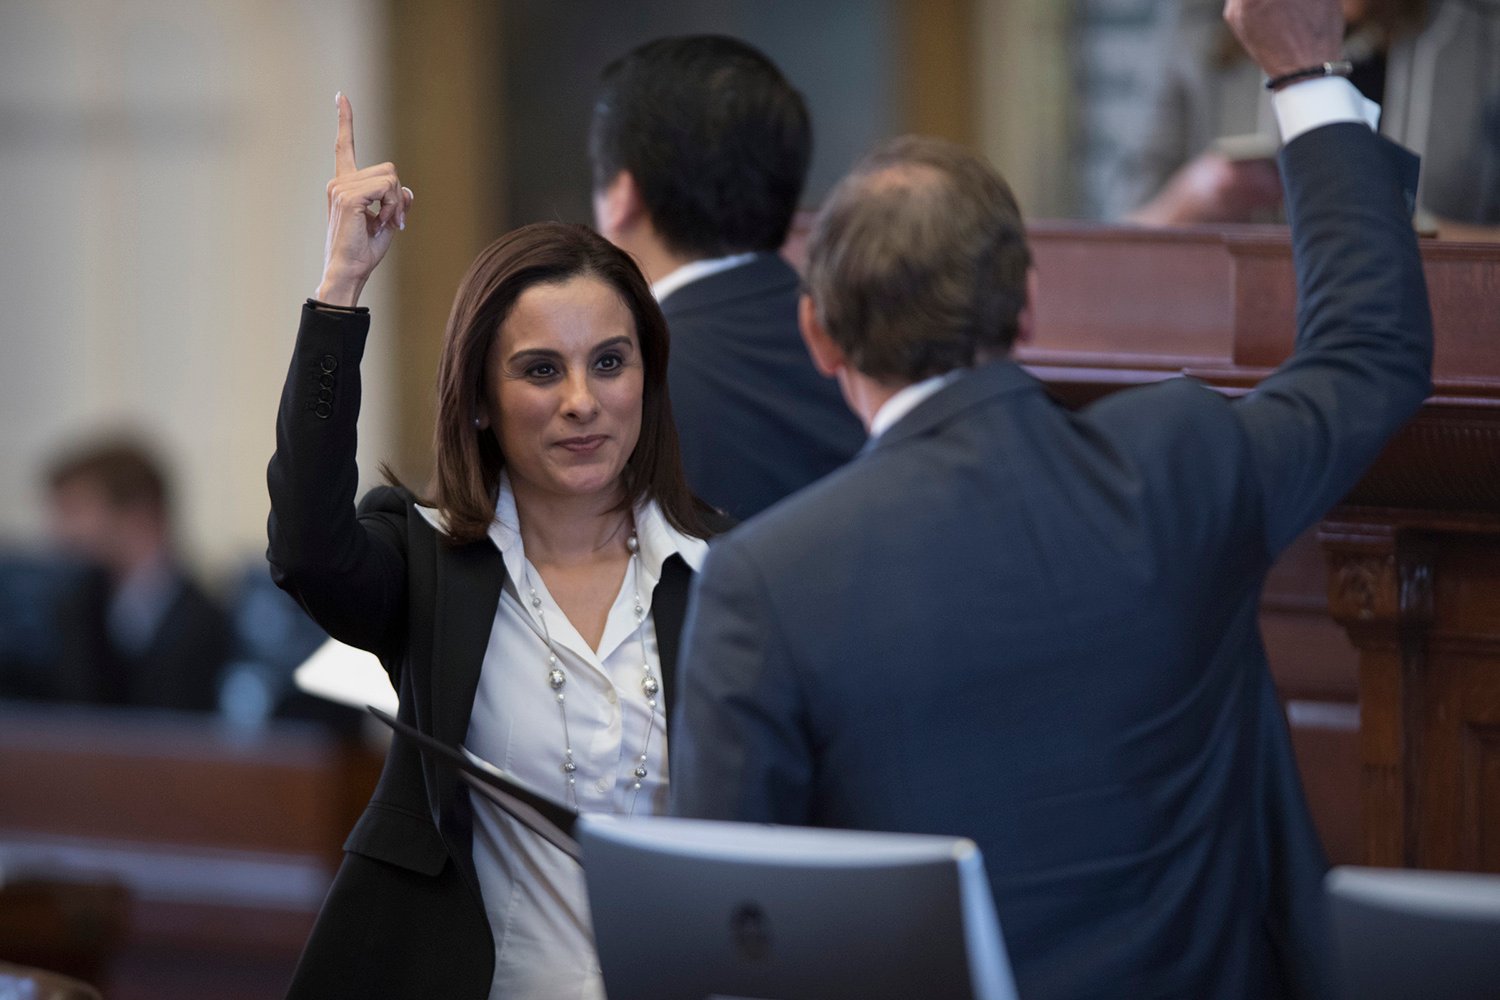 State Rep. Ina Minjarez, D-San Antonio votes in favor of her amendment to gut funding to the attorney general's office to fund programs that serve vulnerable children. It passed, 82 to 61.